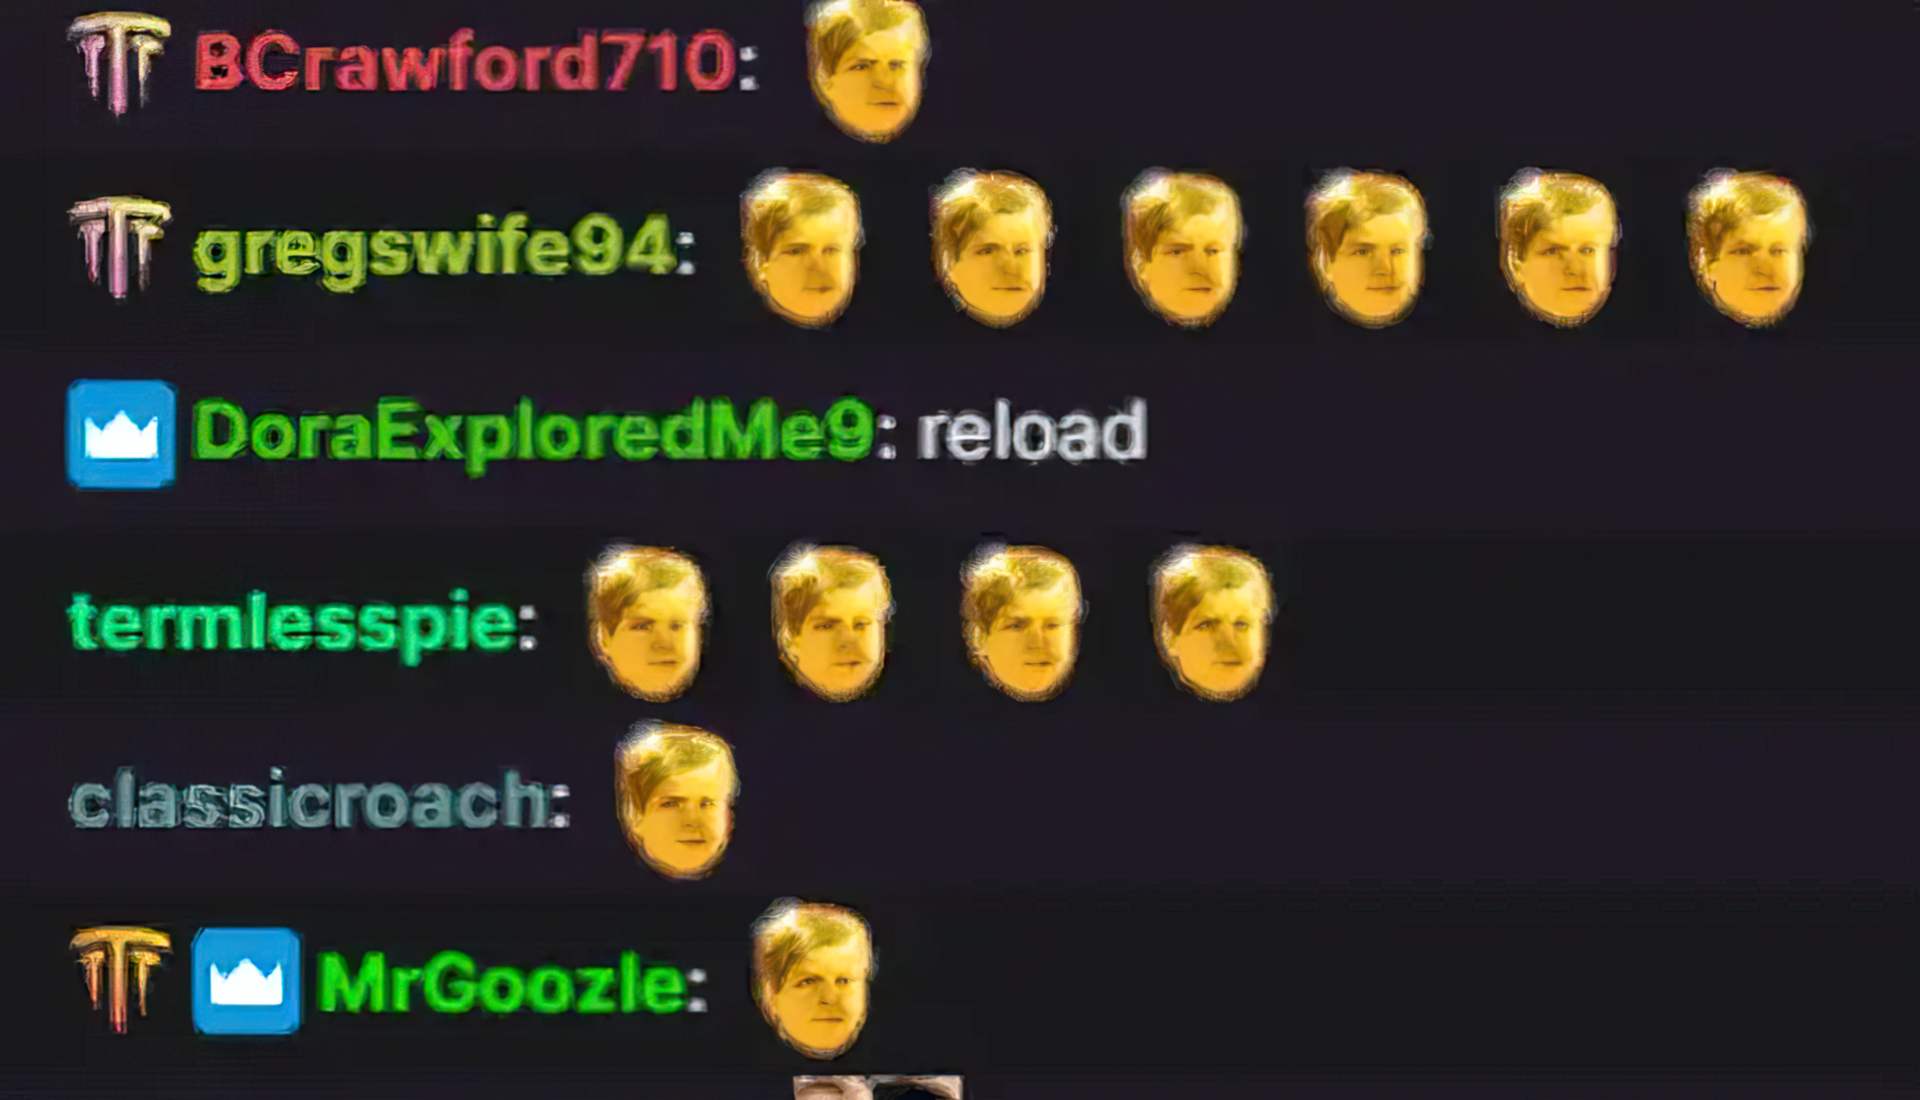 Twitch Golden Kappa explained